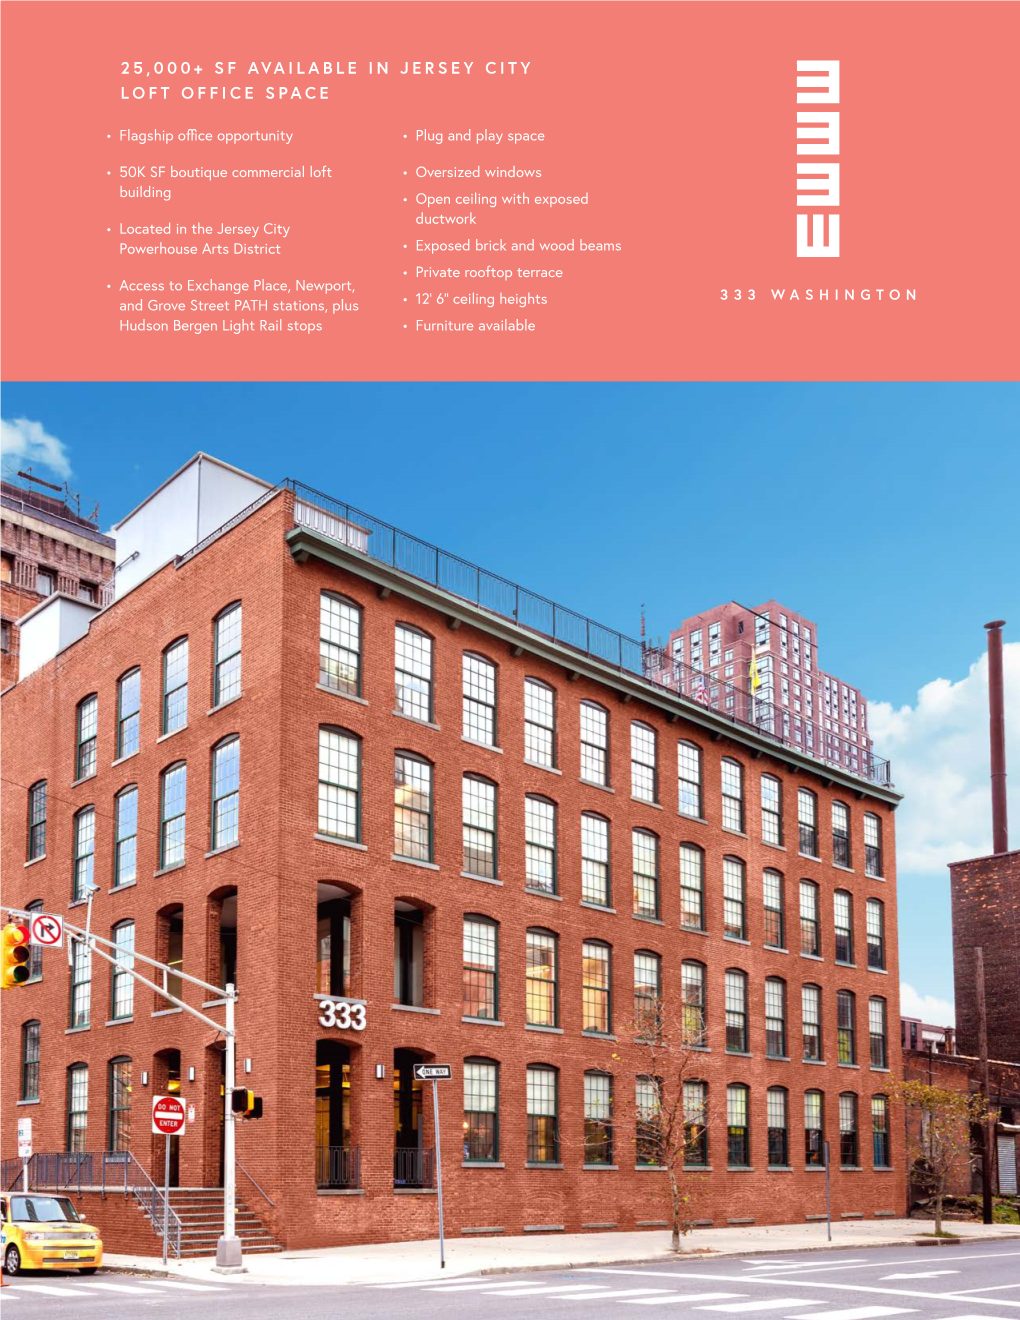 25,000+ Sf Available in Jersey City Loft Office Space